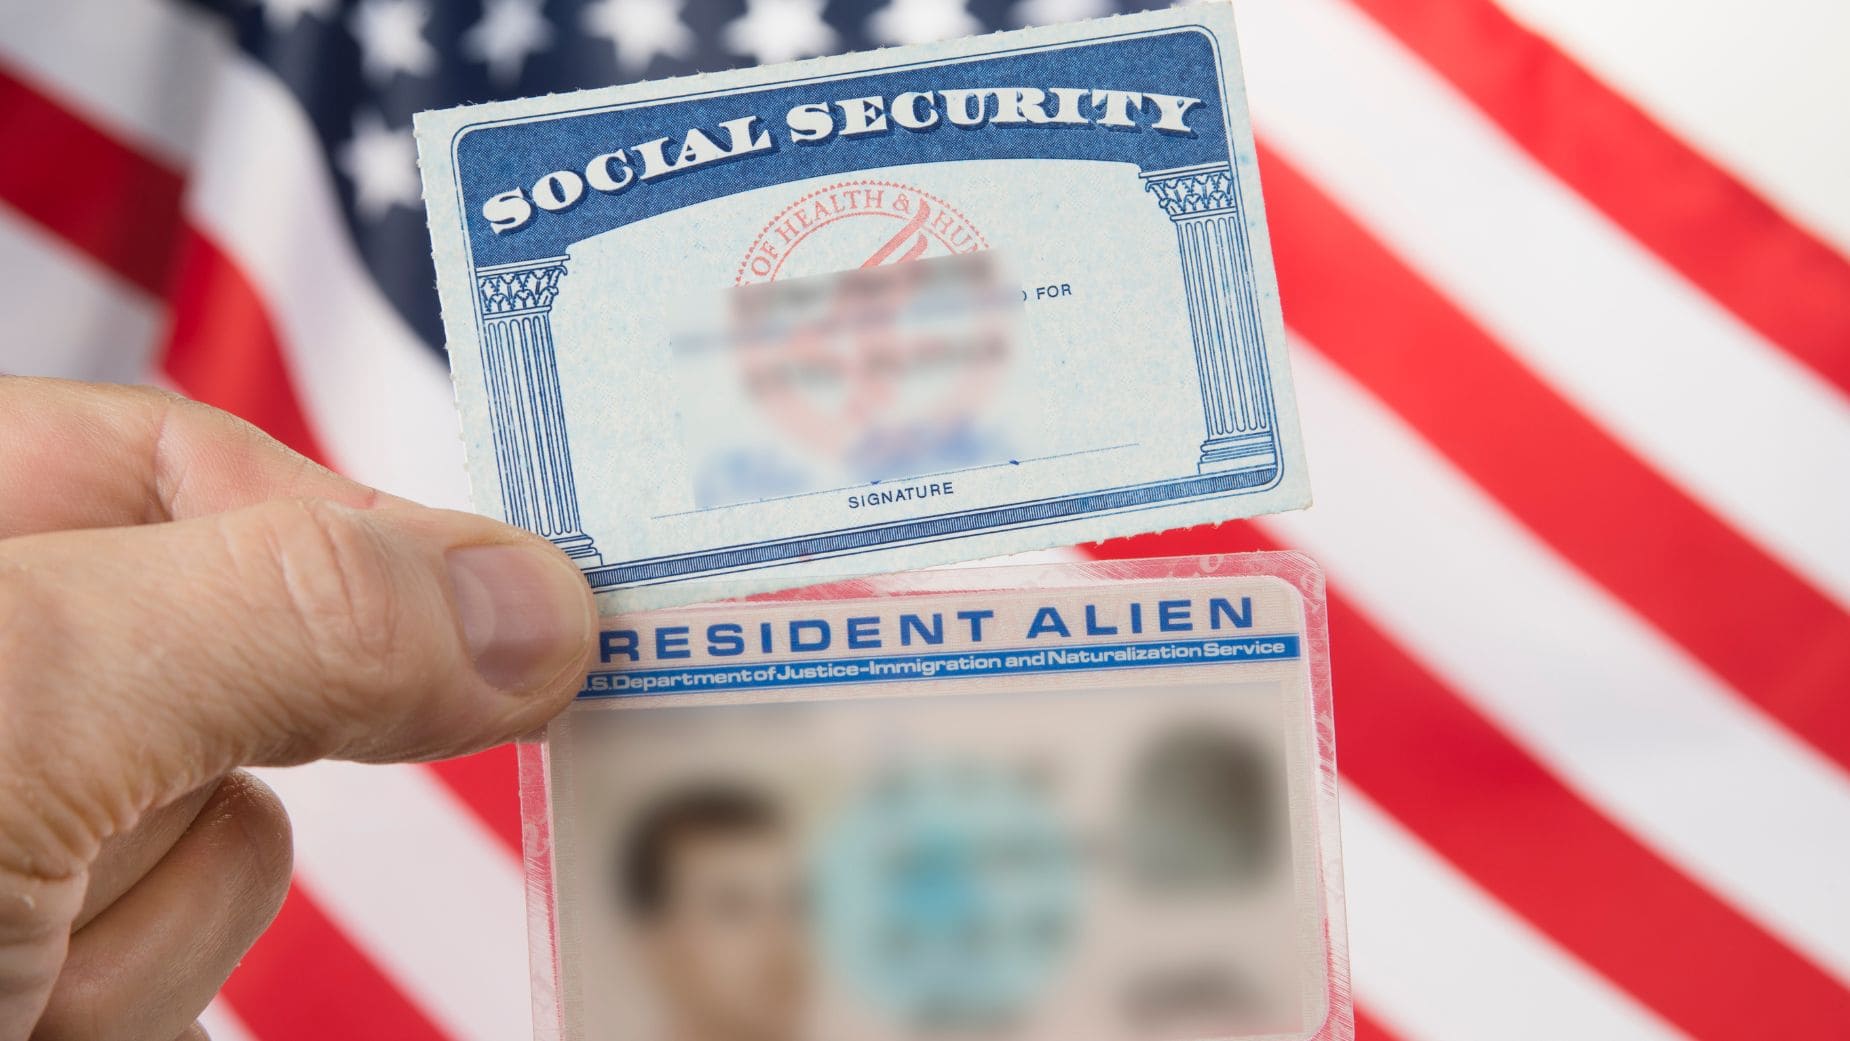 You have to meet the requirements to get the Social Security check